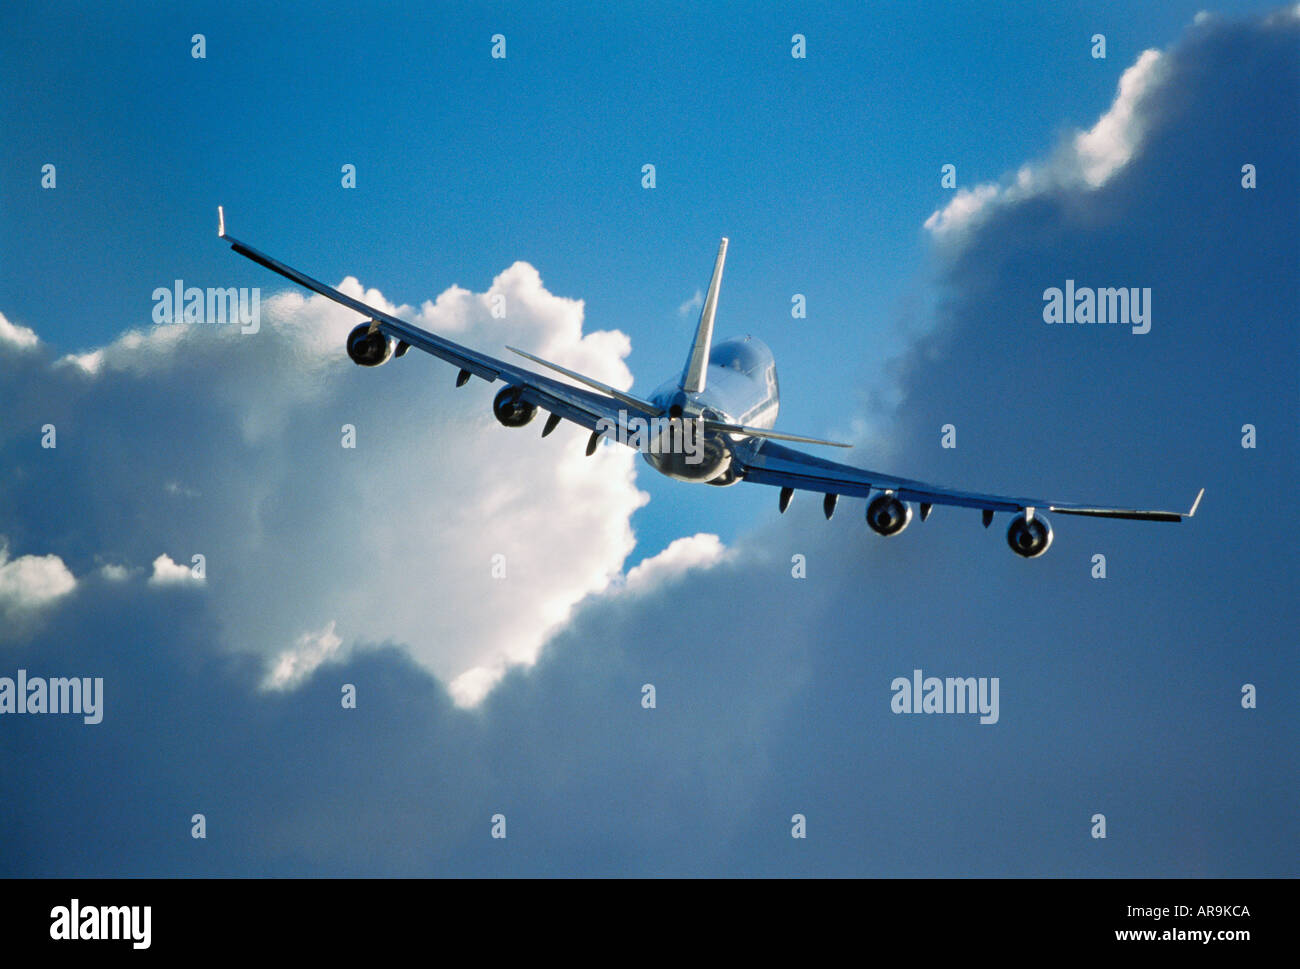 Boeing 747 jumbo jet airliner flying away in the air Stock Photo